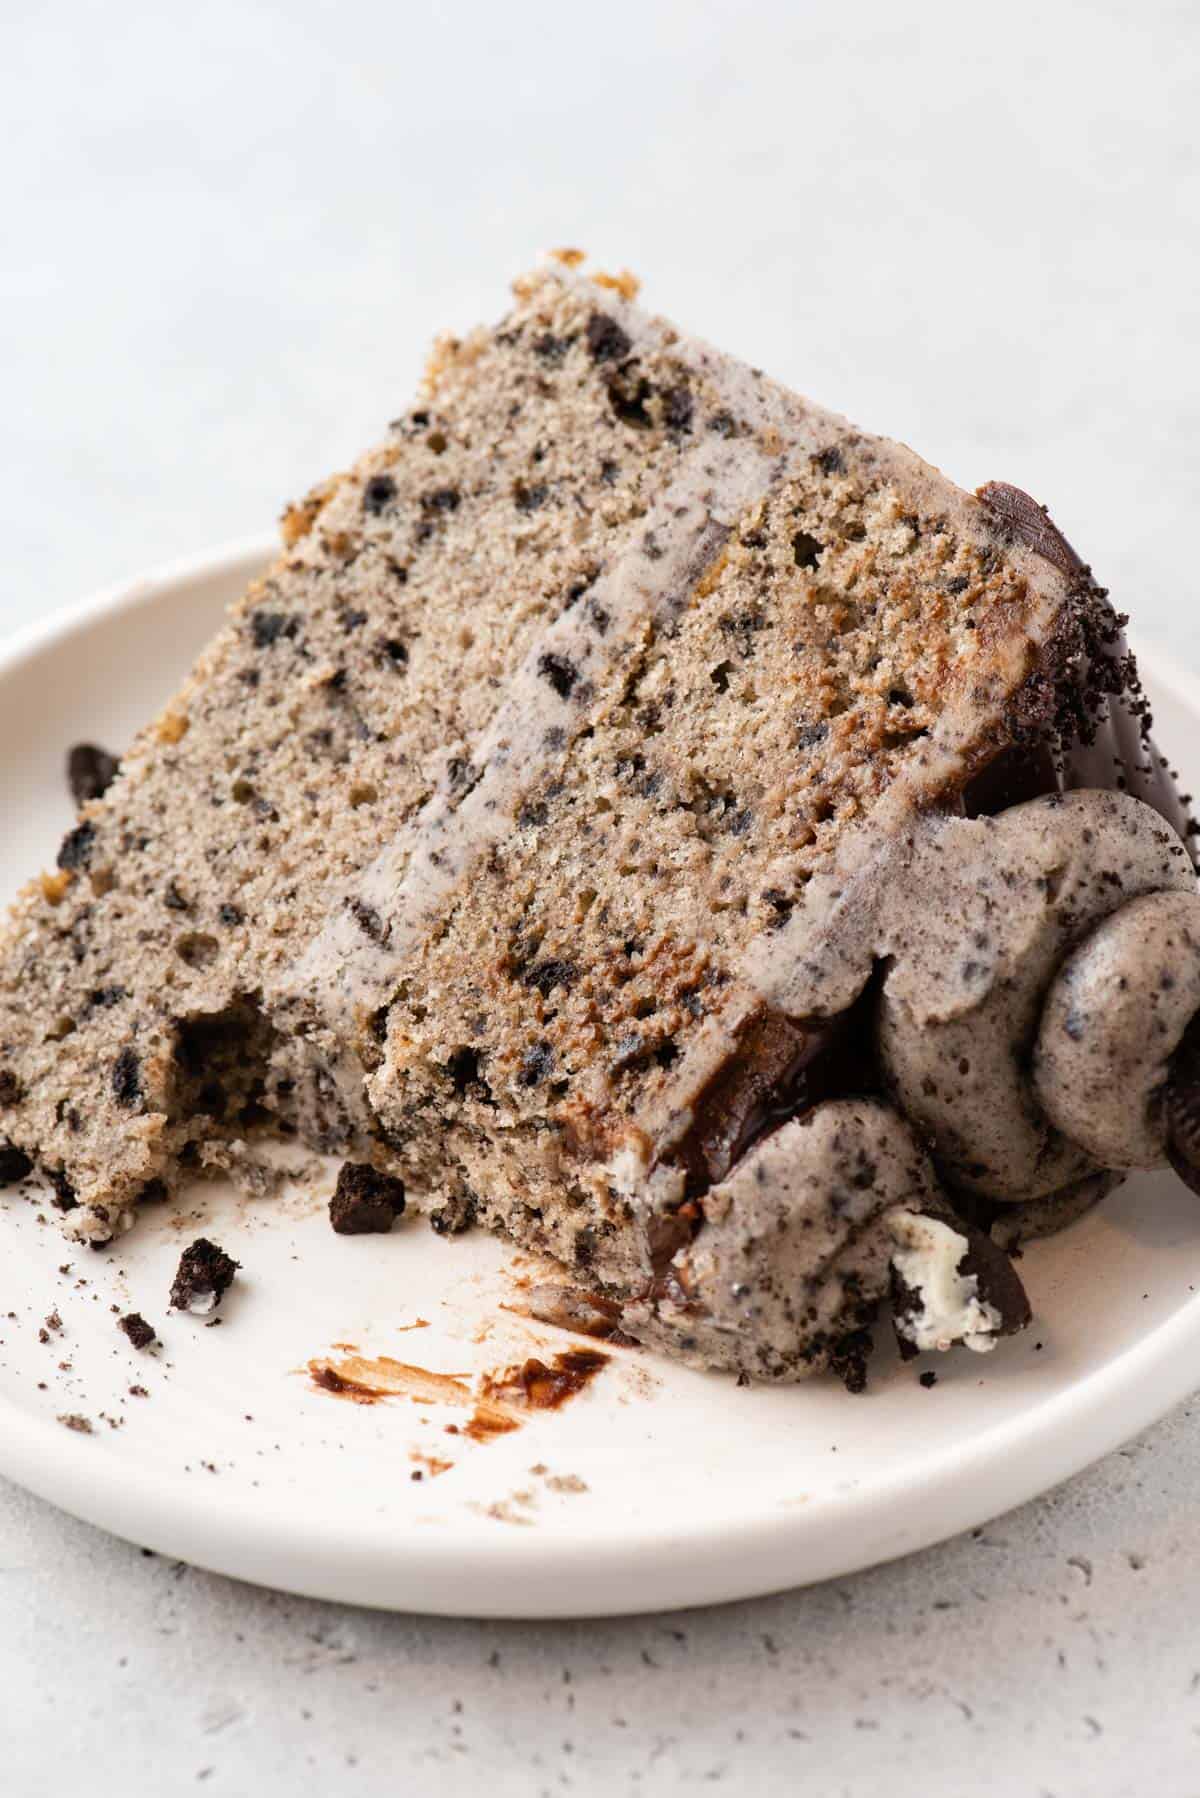 Slice of Oreo cake on plate, with some eaten